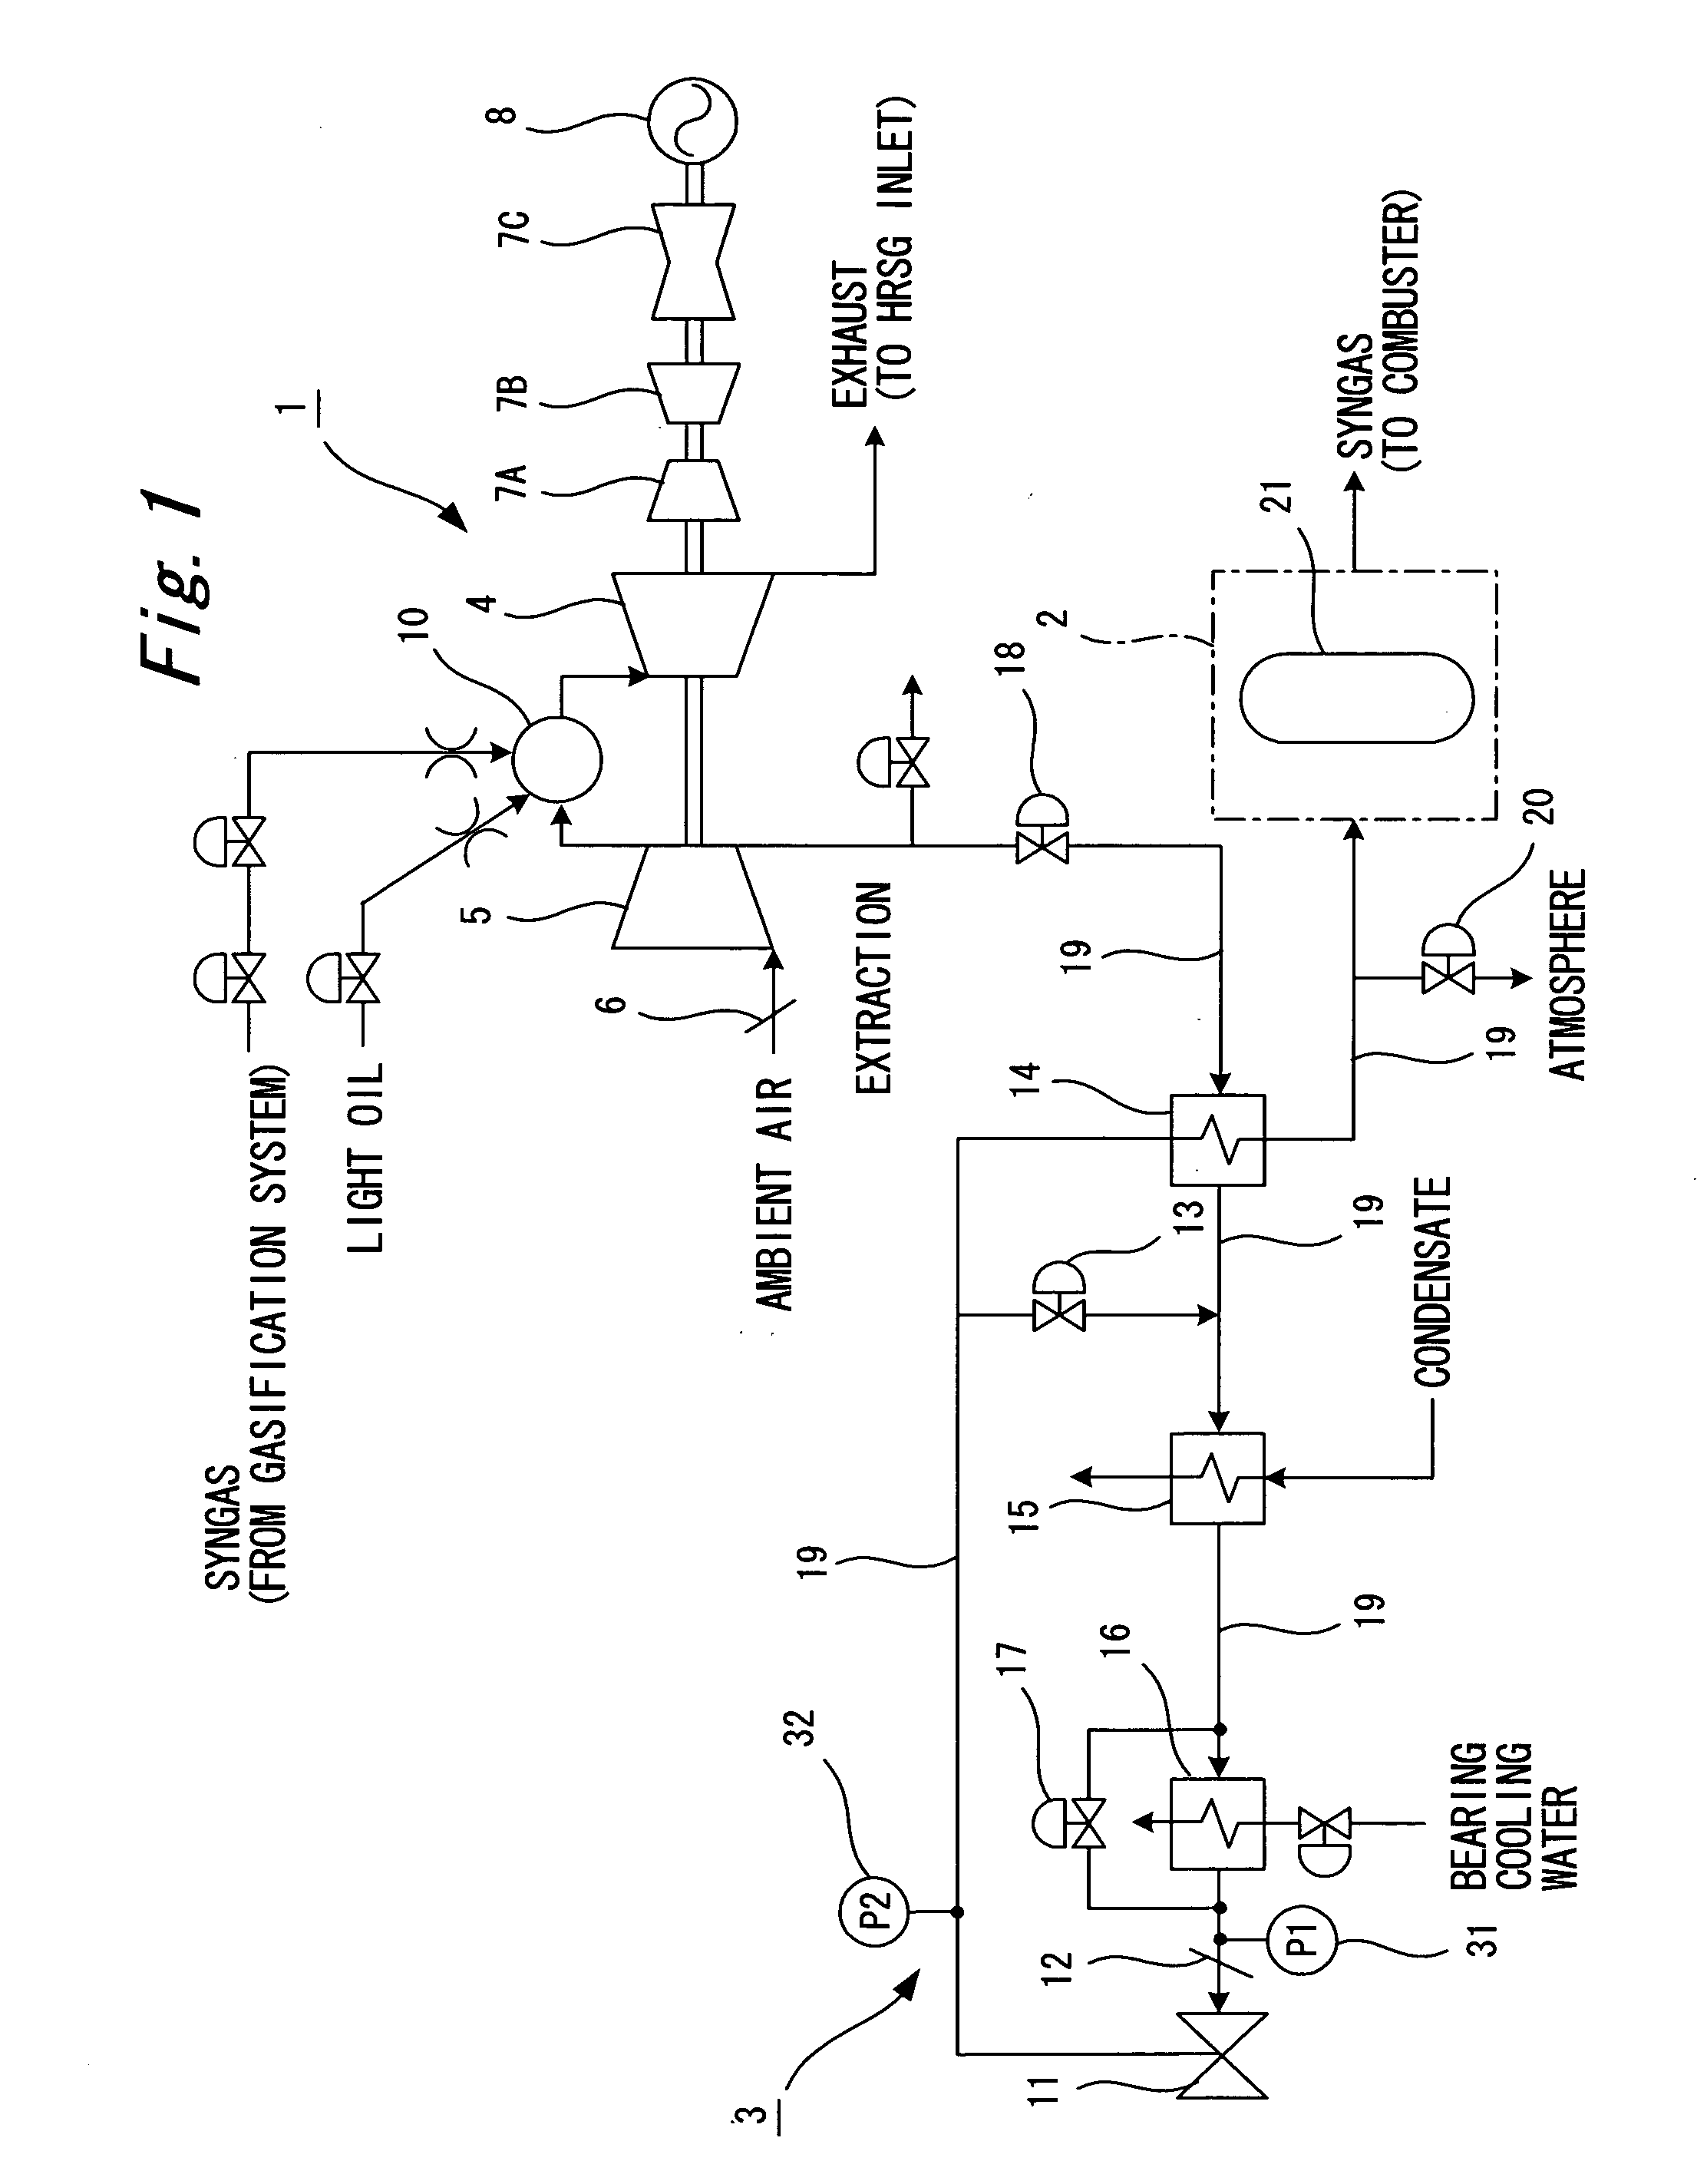 Control apparatus of extracted air booster system of integrated gasification combined cycle power plant